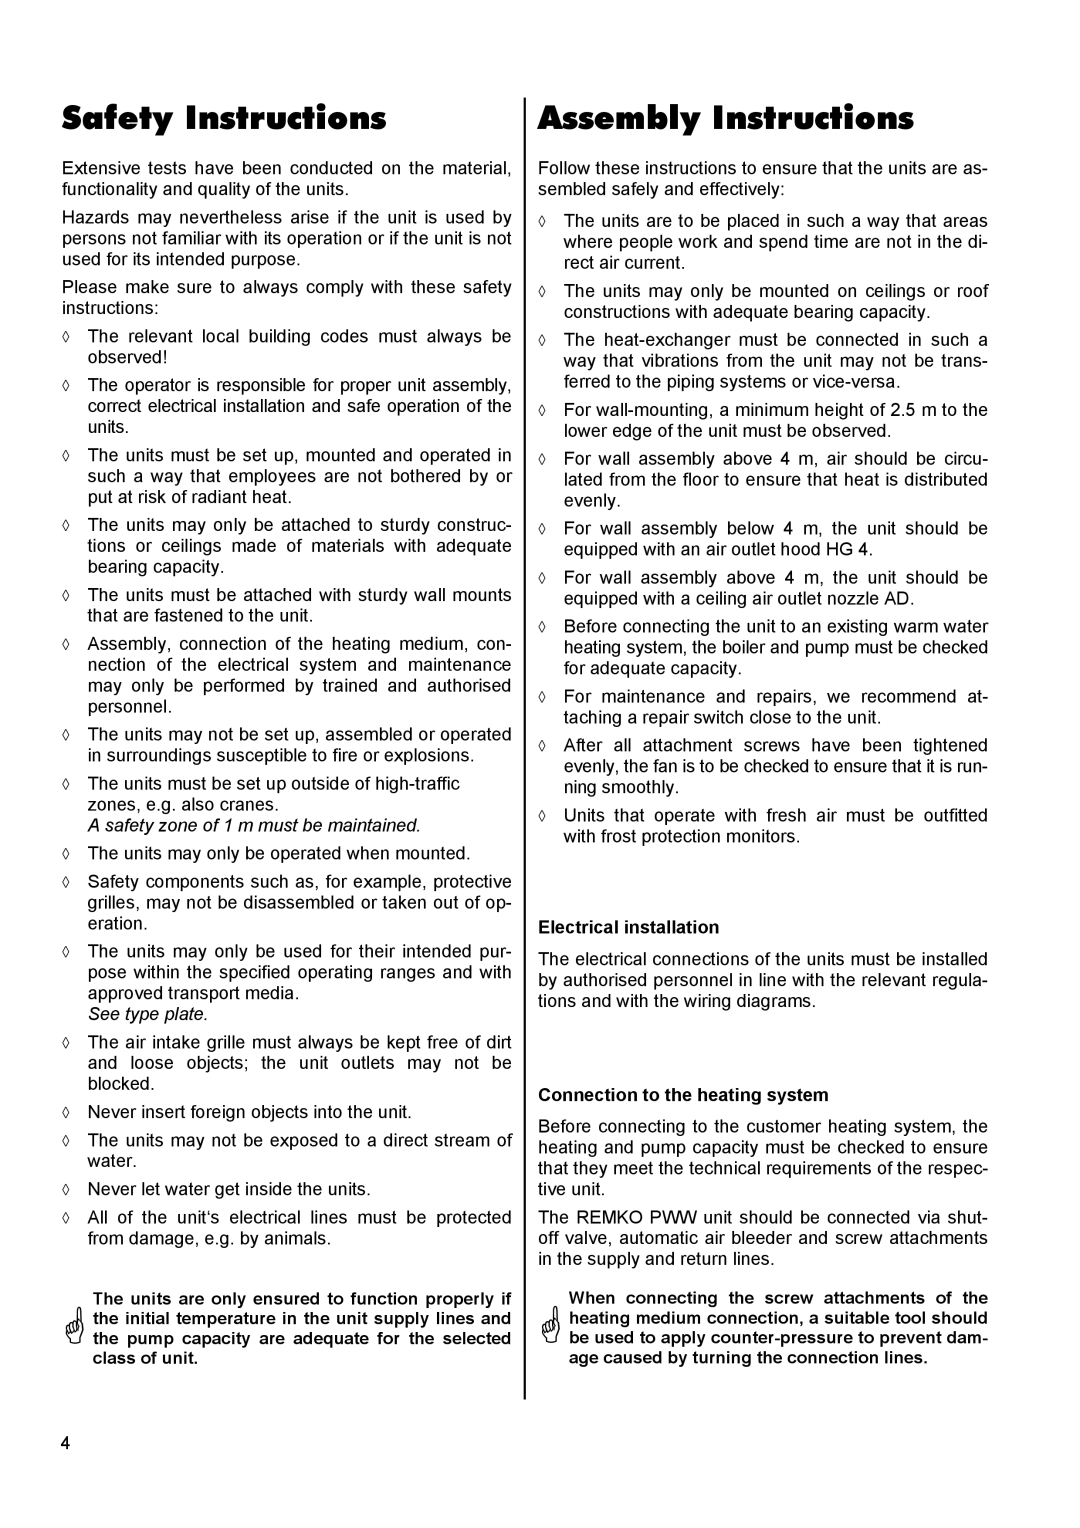 Panasonic PWW 4000 Safety Instructions, Assembly Instructions, Electrical installation, Connection to the heating system 